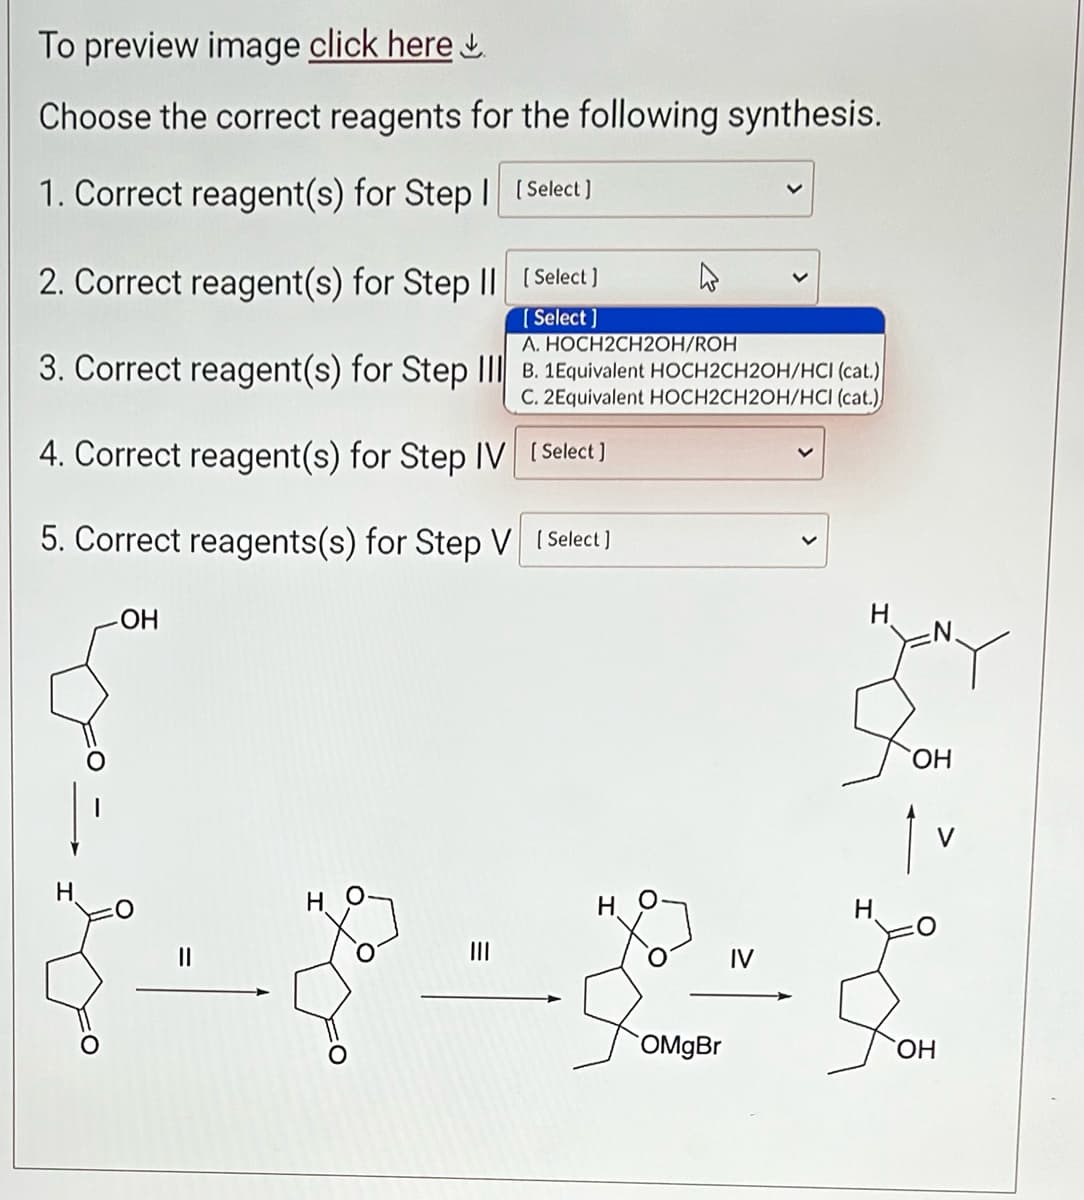 To preview image click here.
Choose the correct reagents for the following synthesis.
1. Correct reagent(s) for Step | [Select]
2. Correct reagent(s) for Step II
A. HOCH2CH2OH/ROH
3. Correct reagent(s) for Step III B. 1Equivalent HOCH2CH2OH/HCI (cat.)
C. 2Equivalent HOCH2CH2OH/HCI (cat.)
4. Correct reagent(s) for Step IV
5. Correct reagents(s) for Step V
-ОН
[Select ]
[Select]
H
[Select]
[ Select]
H
OMgBr
IV
H
H
OH
1
OH